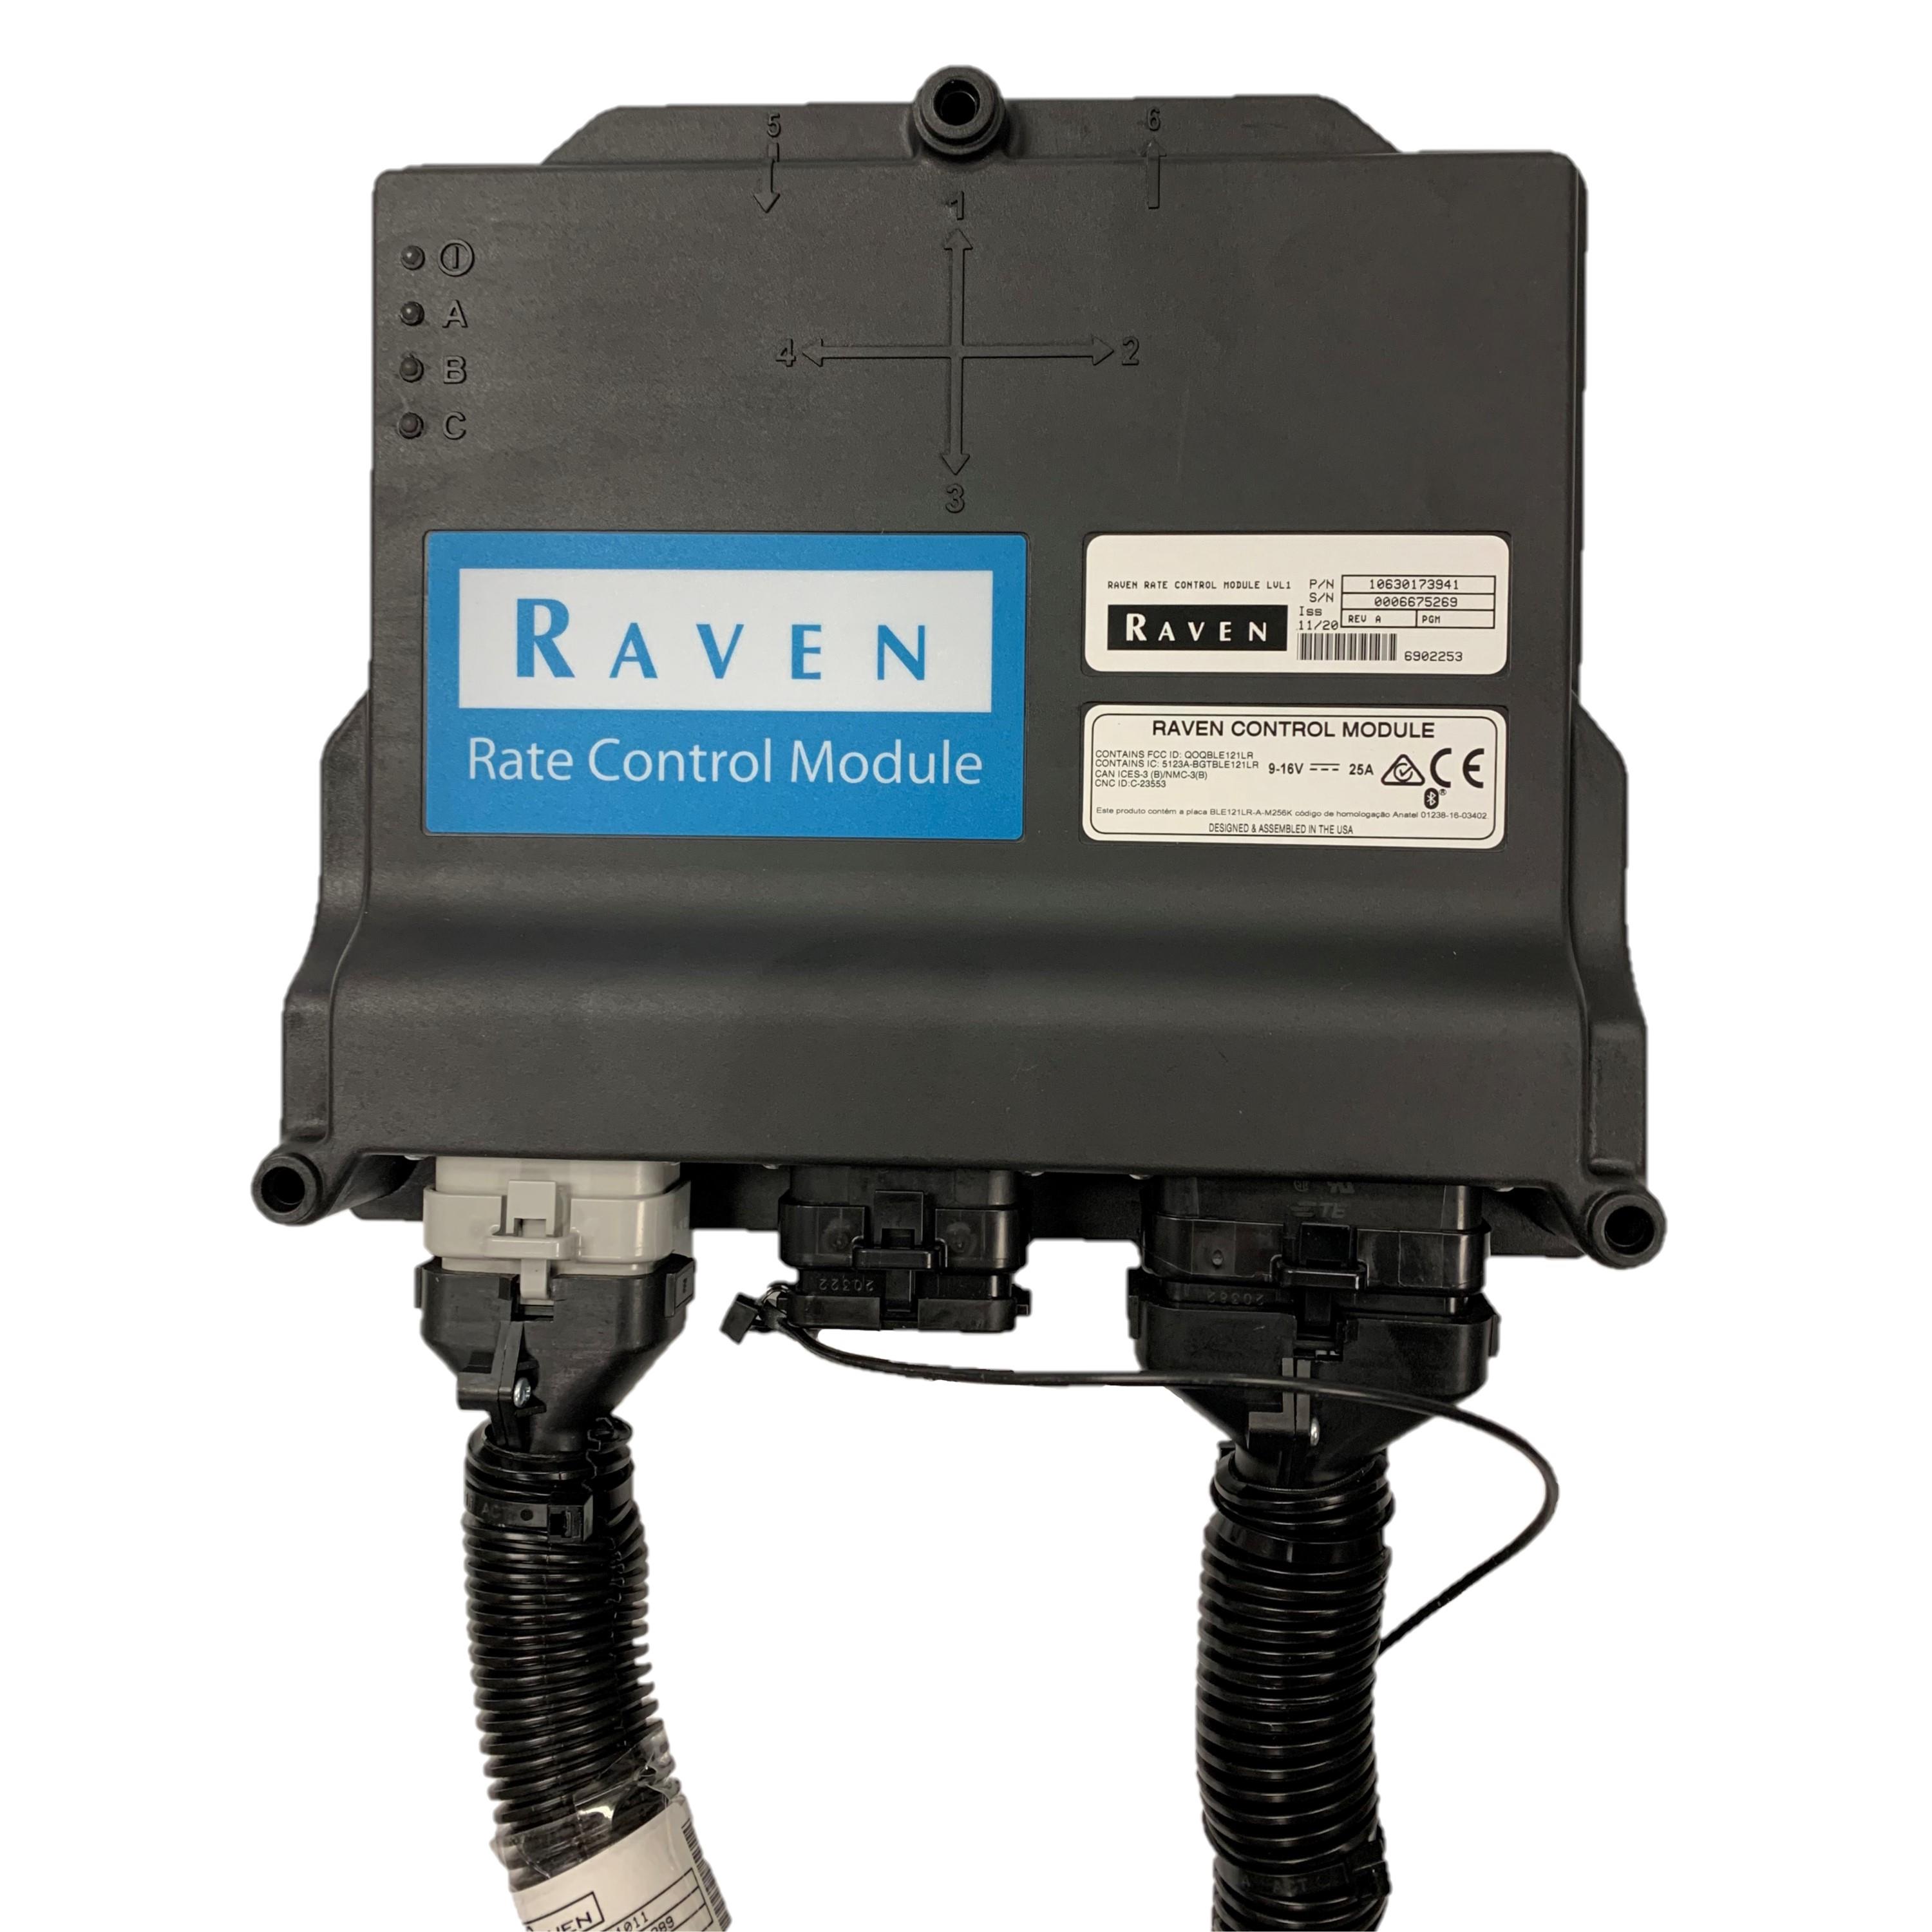 RAVEN RCM LEVEL 1 GEN 3 WITH 47 PIN